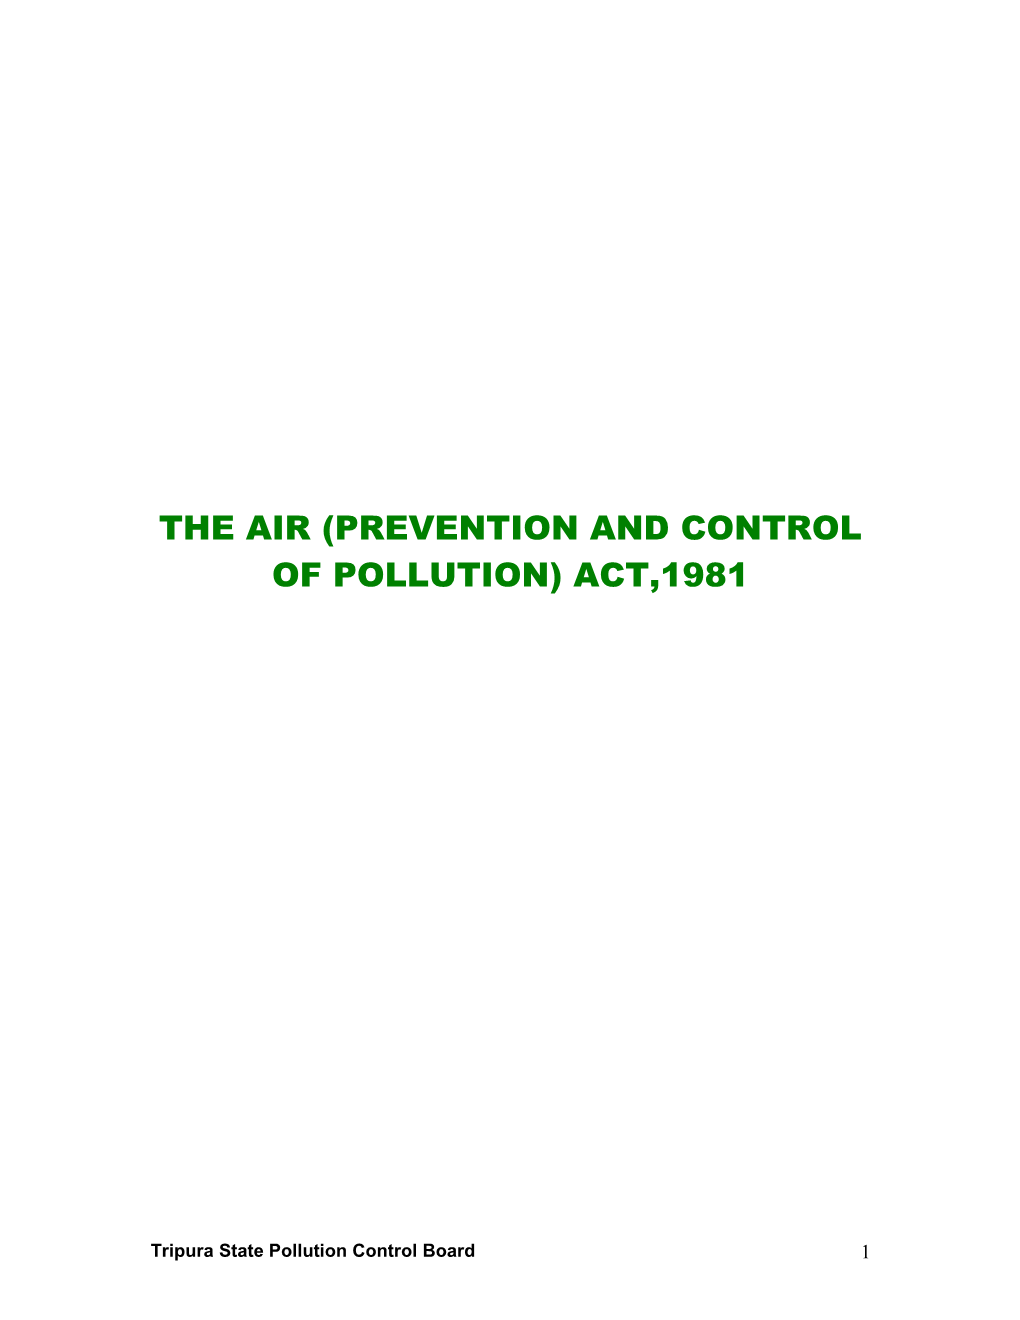 The Air (Prevention and Control of Pollution) Act,1981